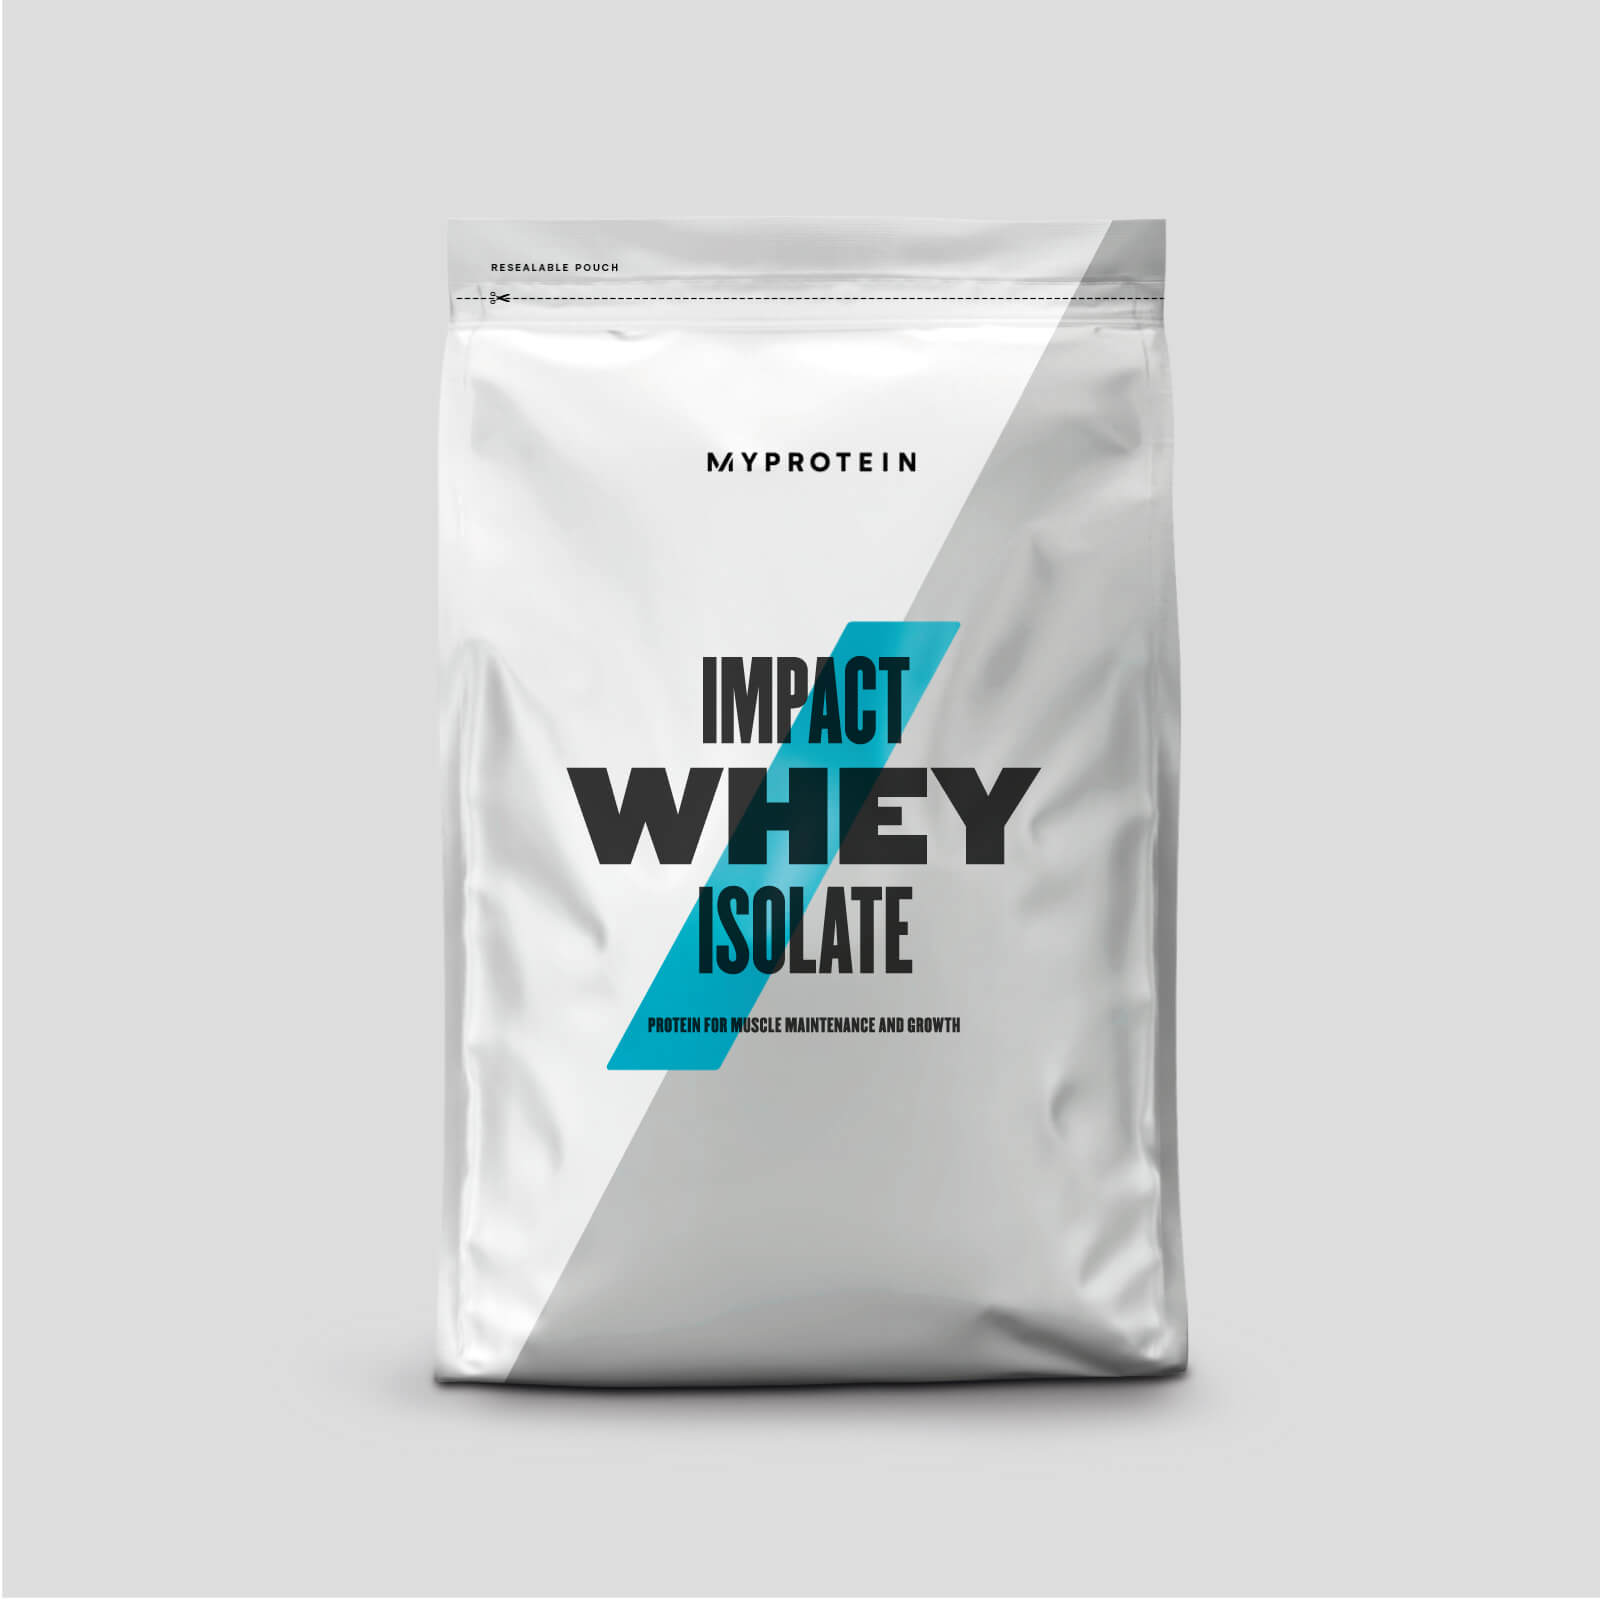 Myprotein Impact Whey Isolate - 1kg - Chocolate Mint